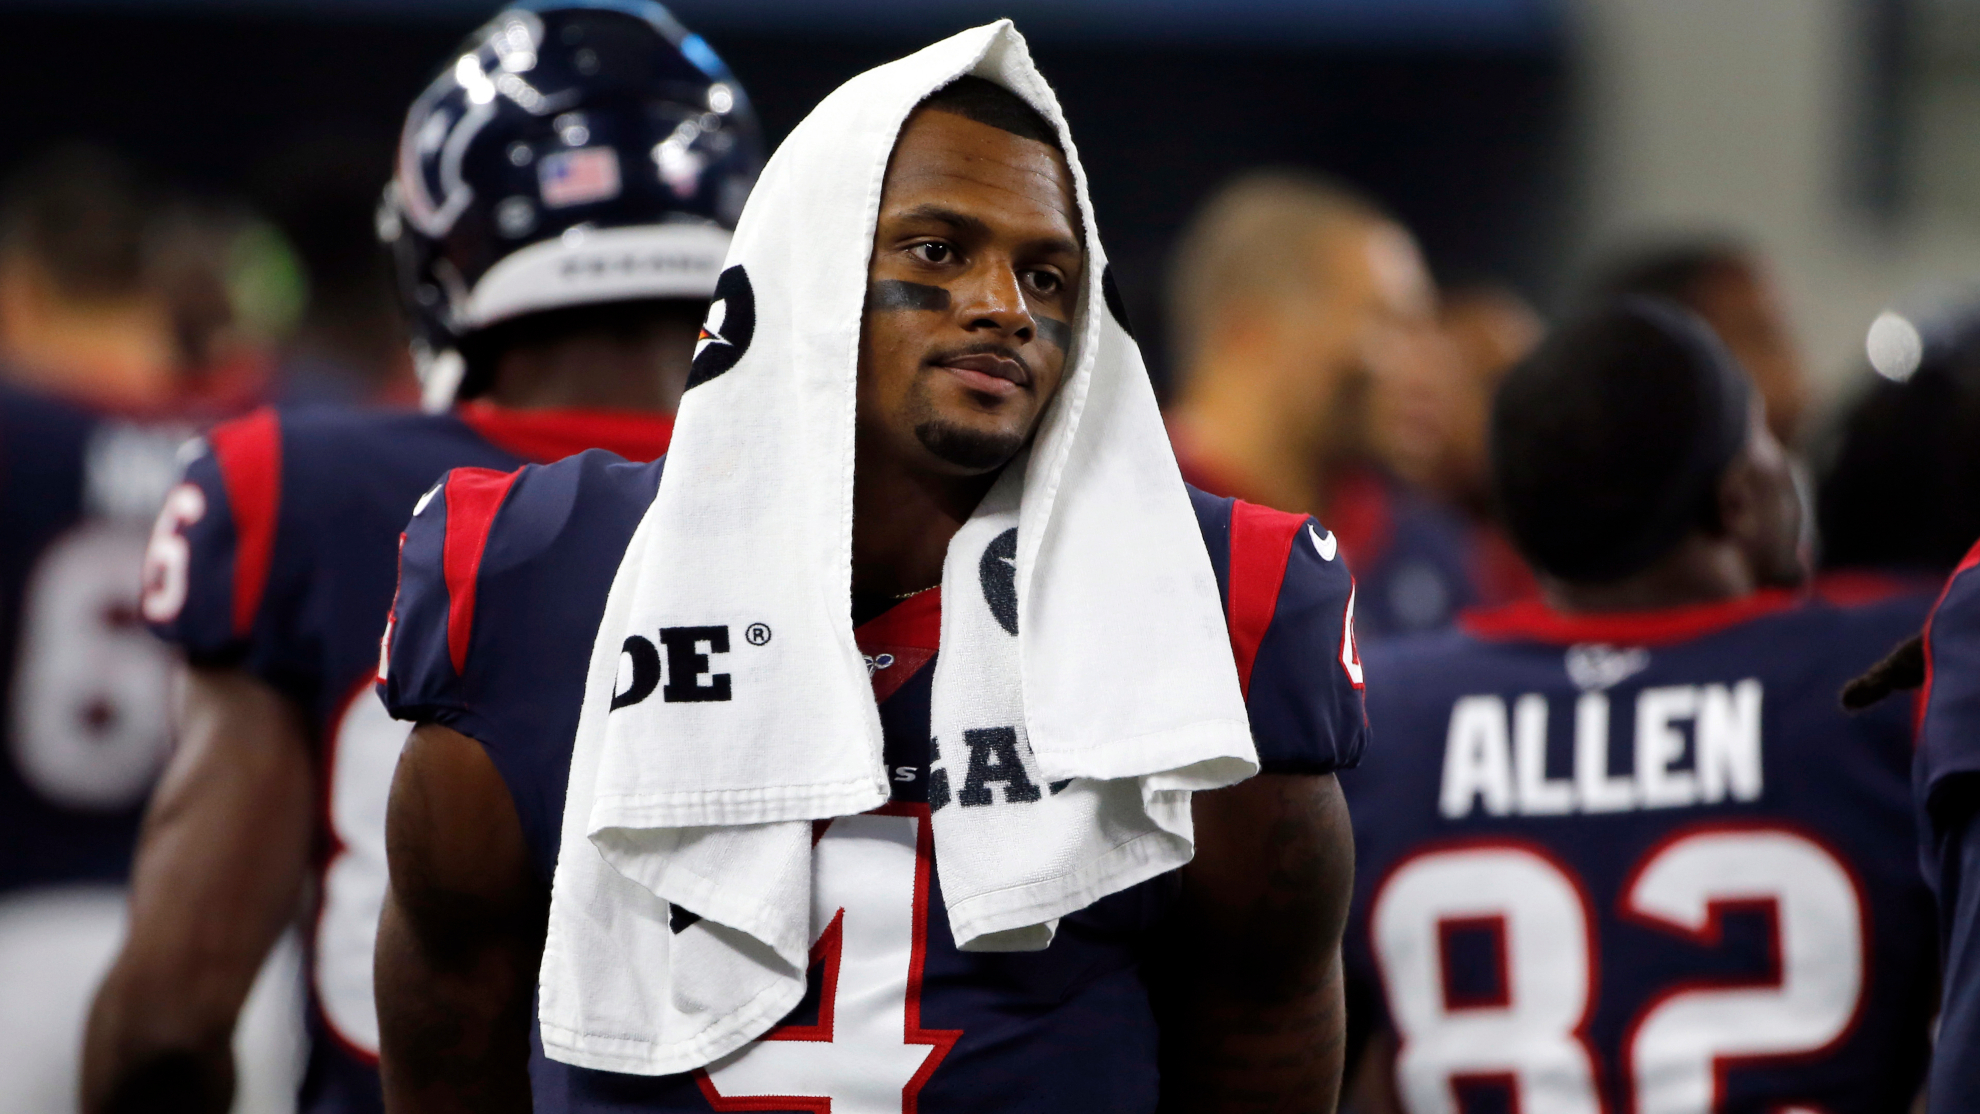 The Texans settle with 30 women in sexual misconduct claims against the team that involved Deshaun Watson